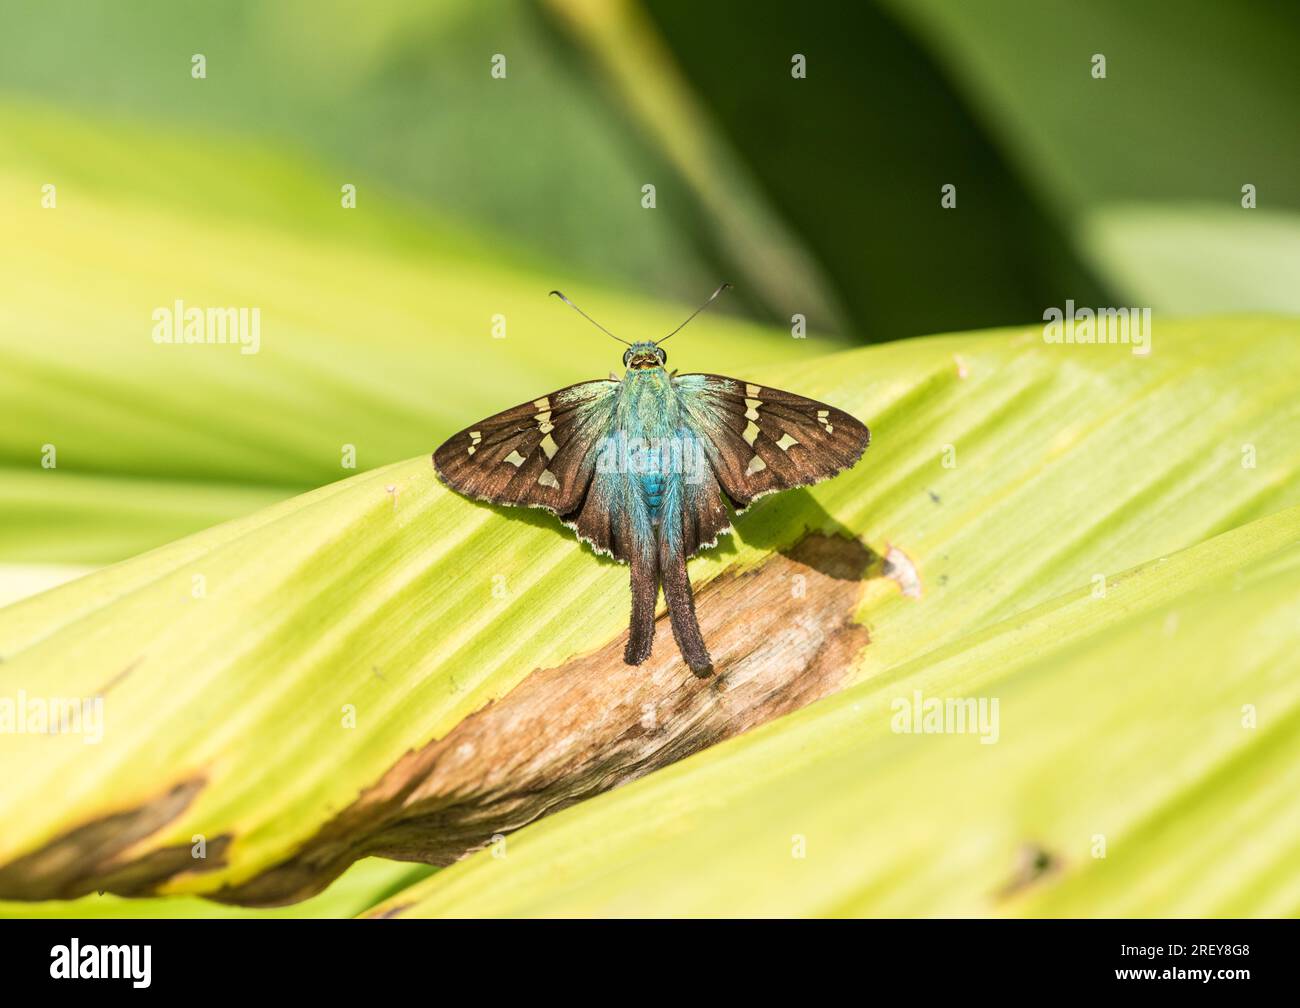 A rather blue looking Long-tailed Skipper (Urbanus proteus) resting on a leaf Stock Photo